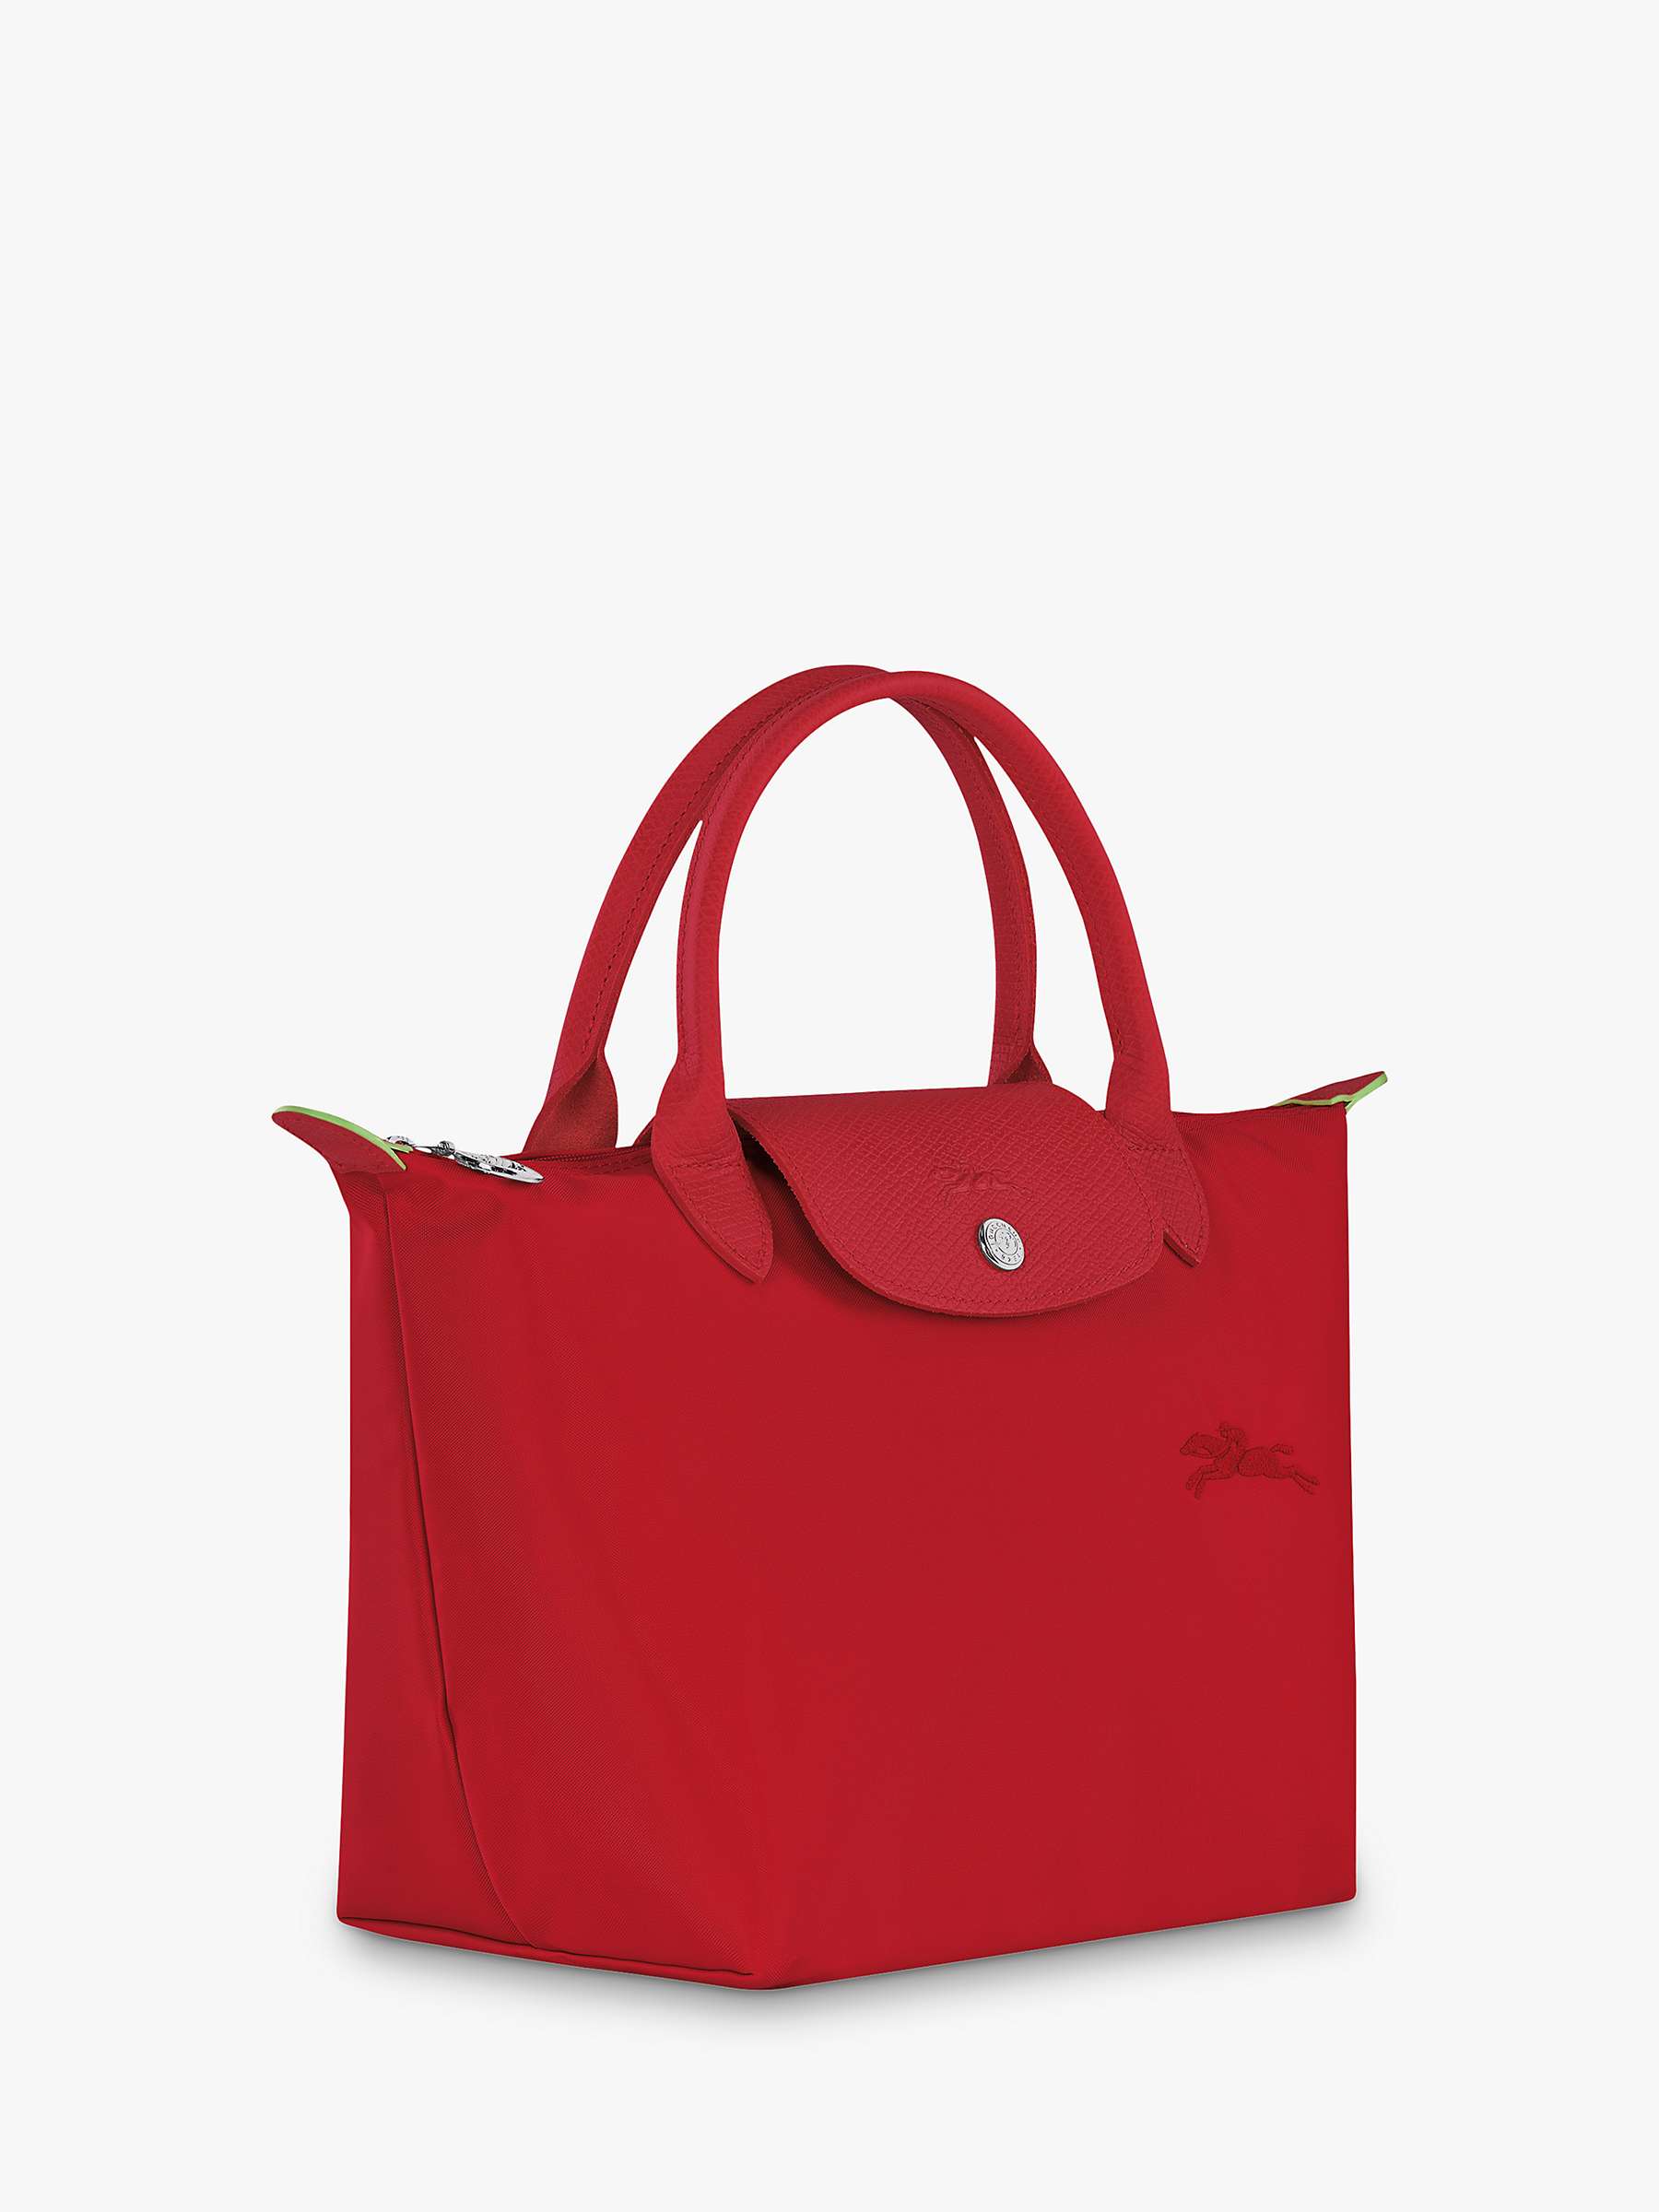 Buy Longchamp Le Pliage Recycled Canvas Small Top Handle Bag Online at johnlewis.com